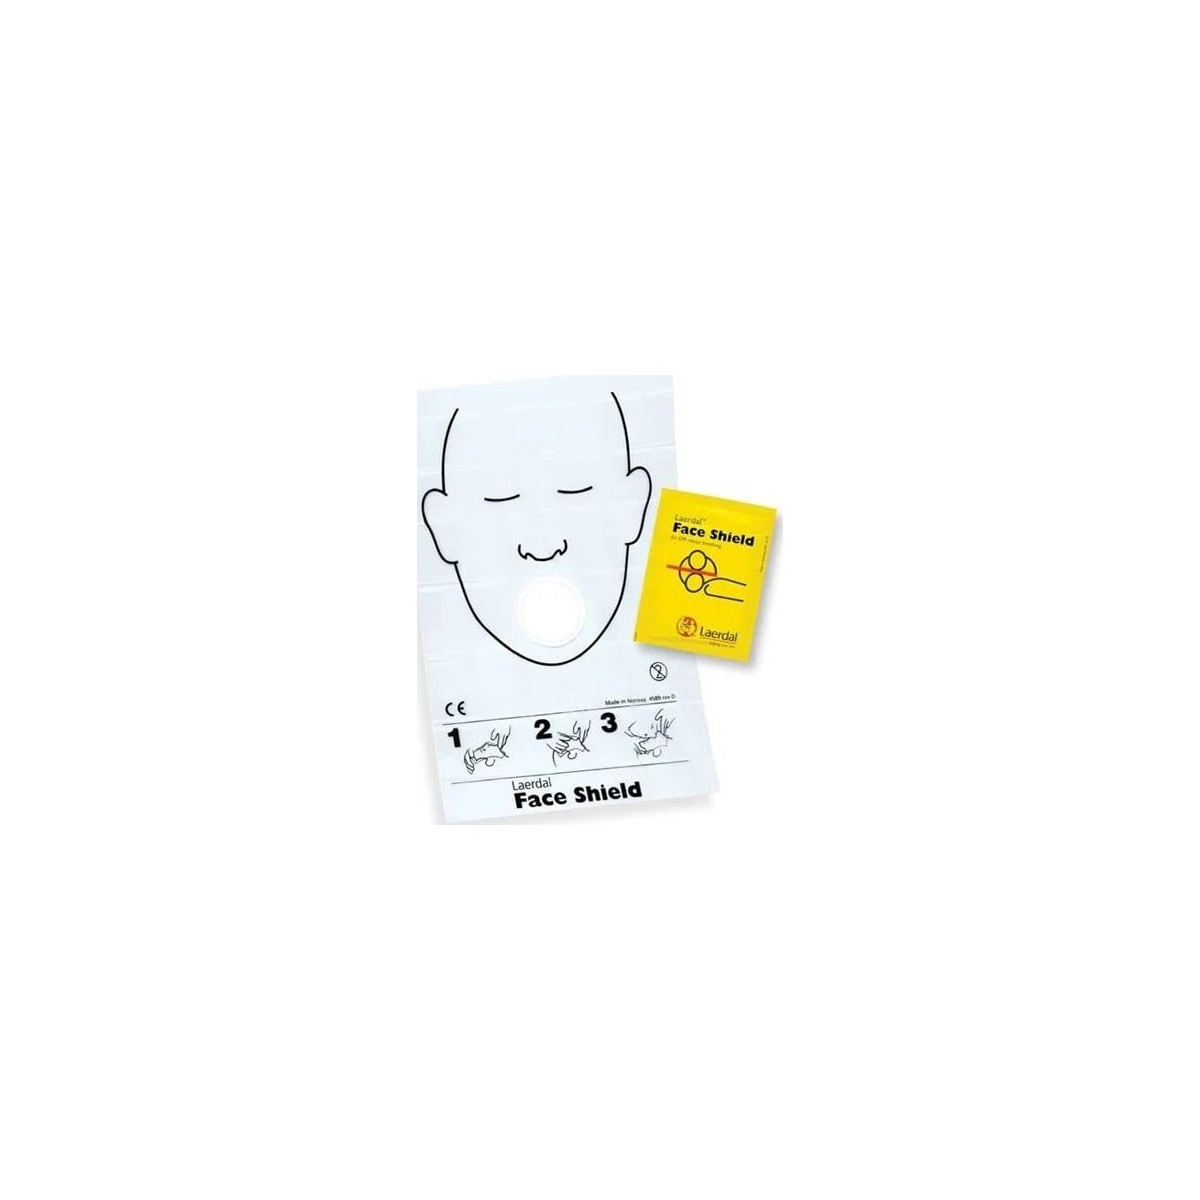 Laerdal Face Shield CPR Barrier (50 Pack)